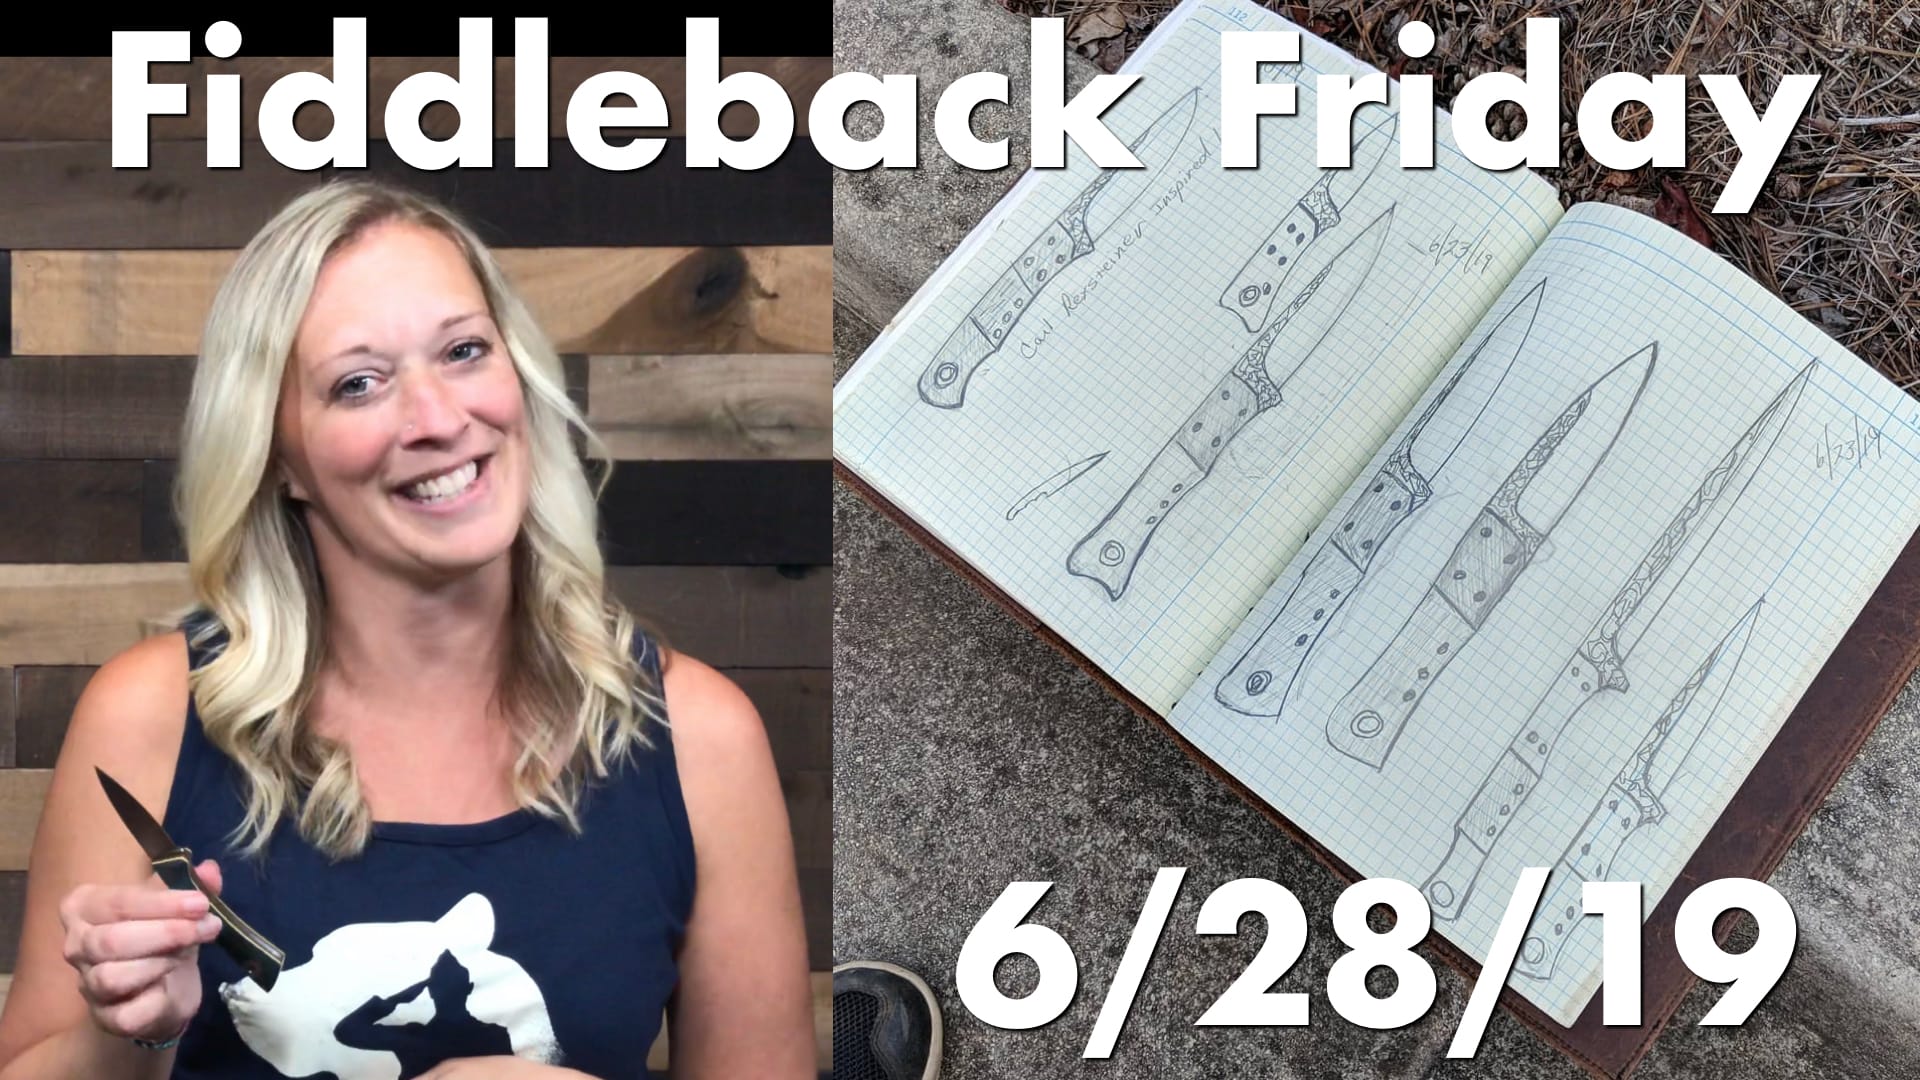 Fiddleback Friday - 6/28/19 - Video Preview